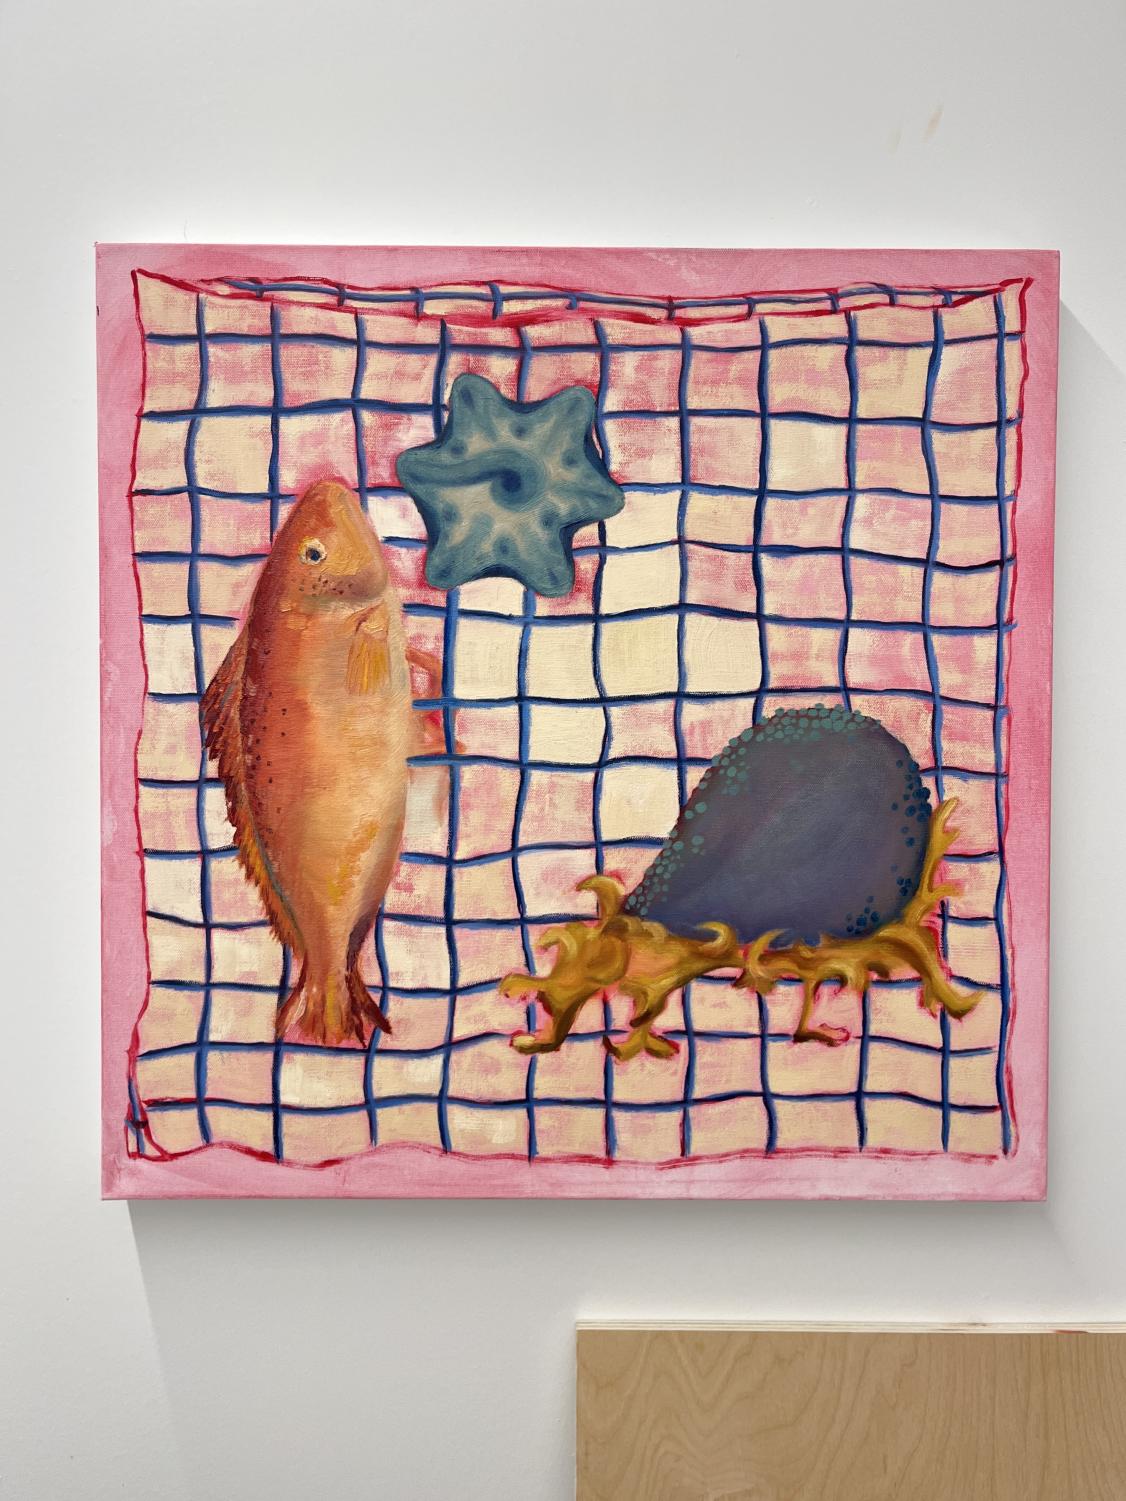 An oil painting with a pink gridded background showing an orange fish, a blue starfish, and a dark blue-and-orange ambiguous sea creature. The painting hangs on a white wall, with the top left corner of a brown board in the bottom right corner of the image.